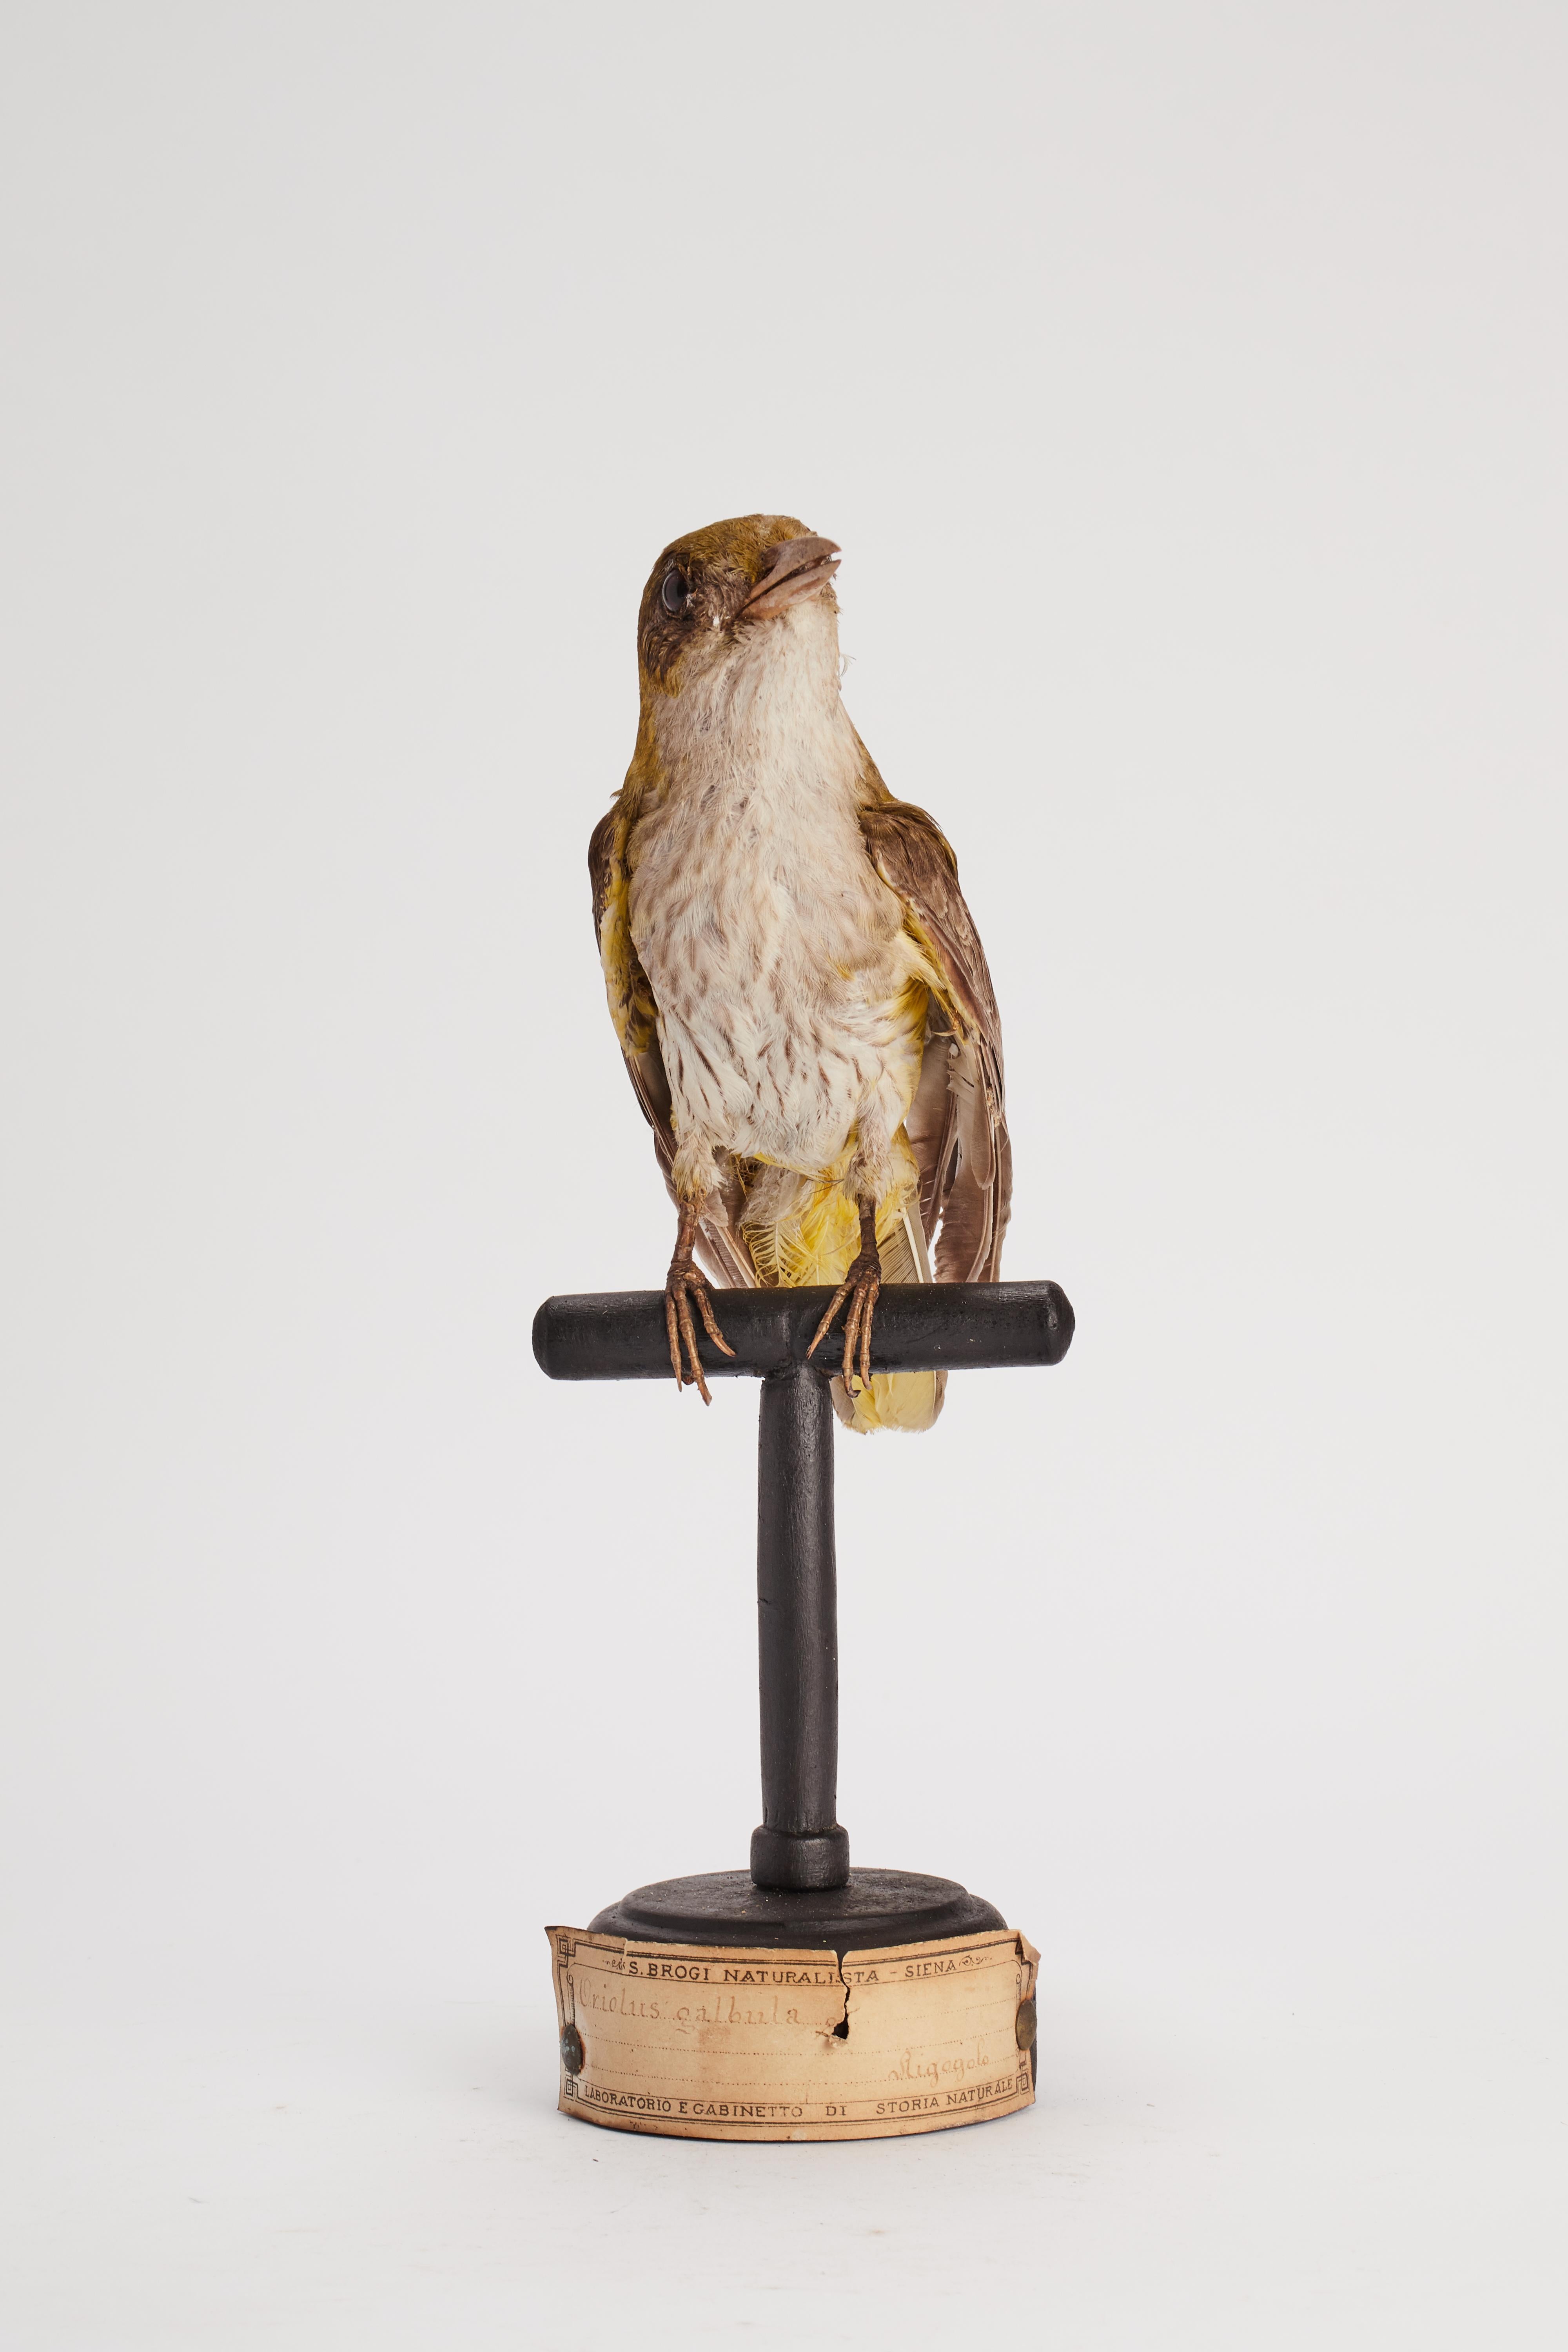 Natural specimen from Wunderkammer Stuffed bird (Icterus galbula) Baltimore jaundice on a wooden base with cartouche Specimen for laboratory and Natural history cabinet. S. Brogi Naturalista. Siena, Italy 1880 ca.